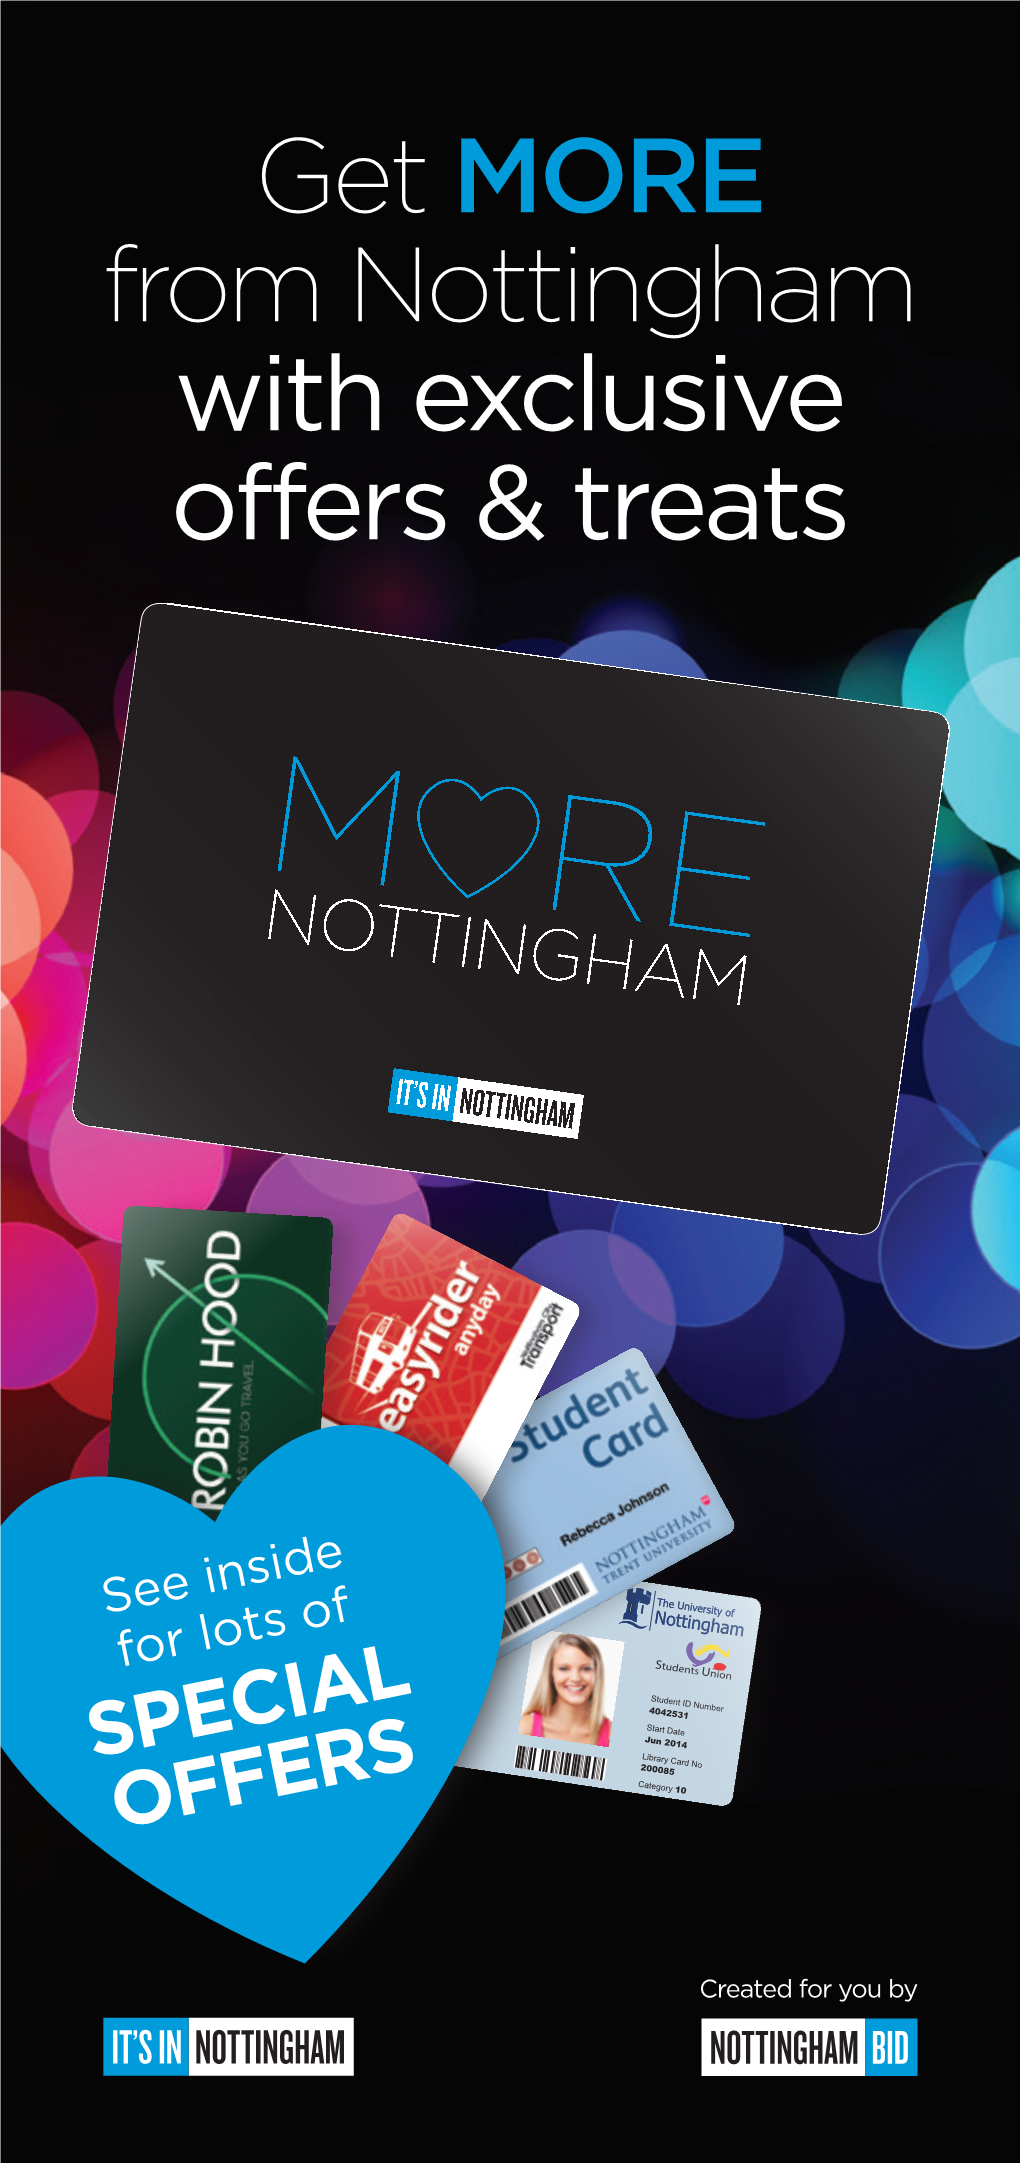 Get MORE from Nottingham with Exclusive Offers & Treats